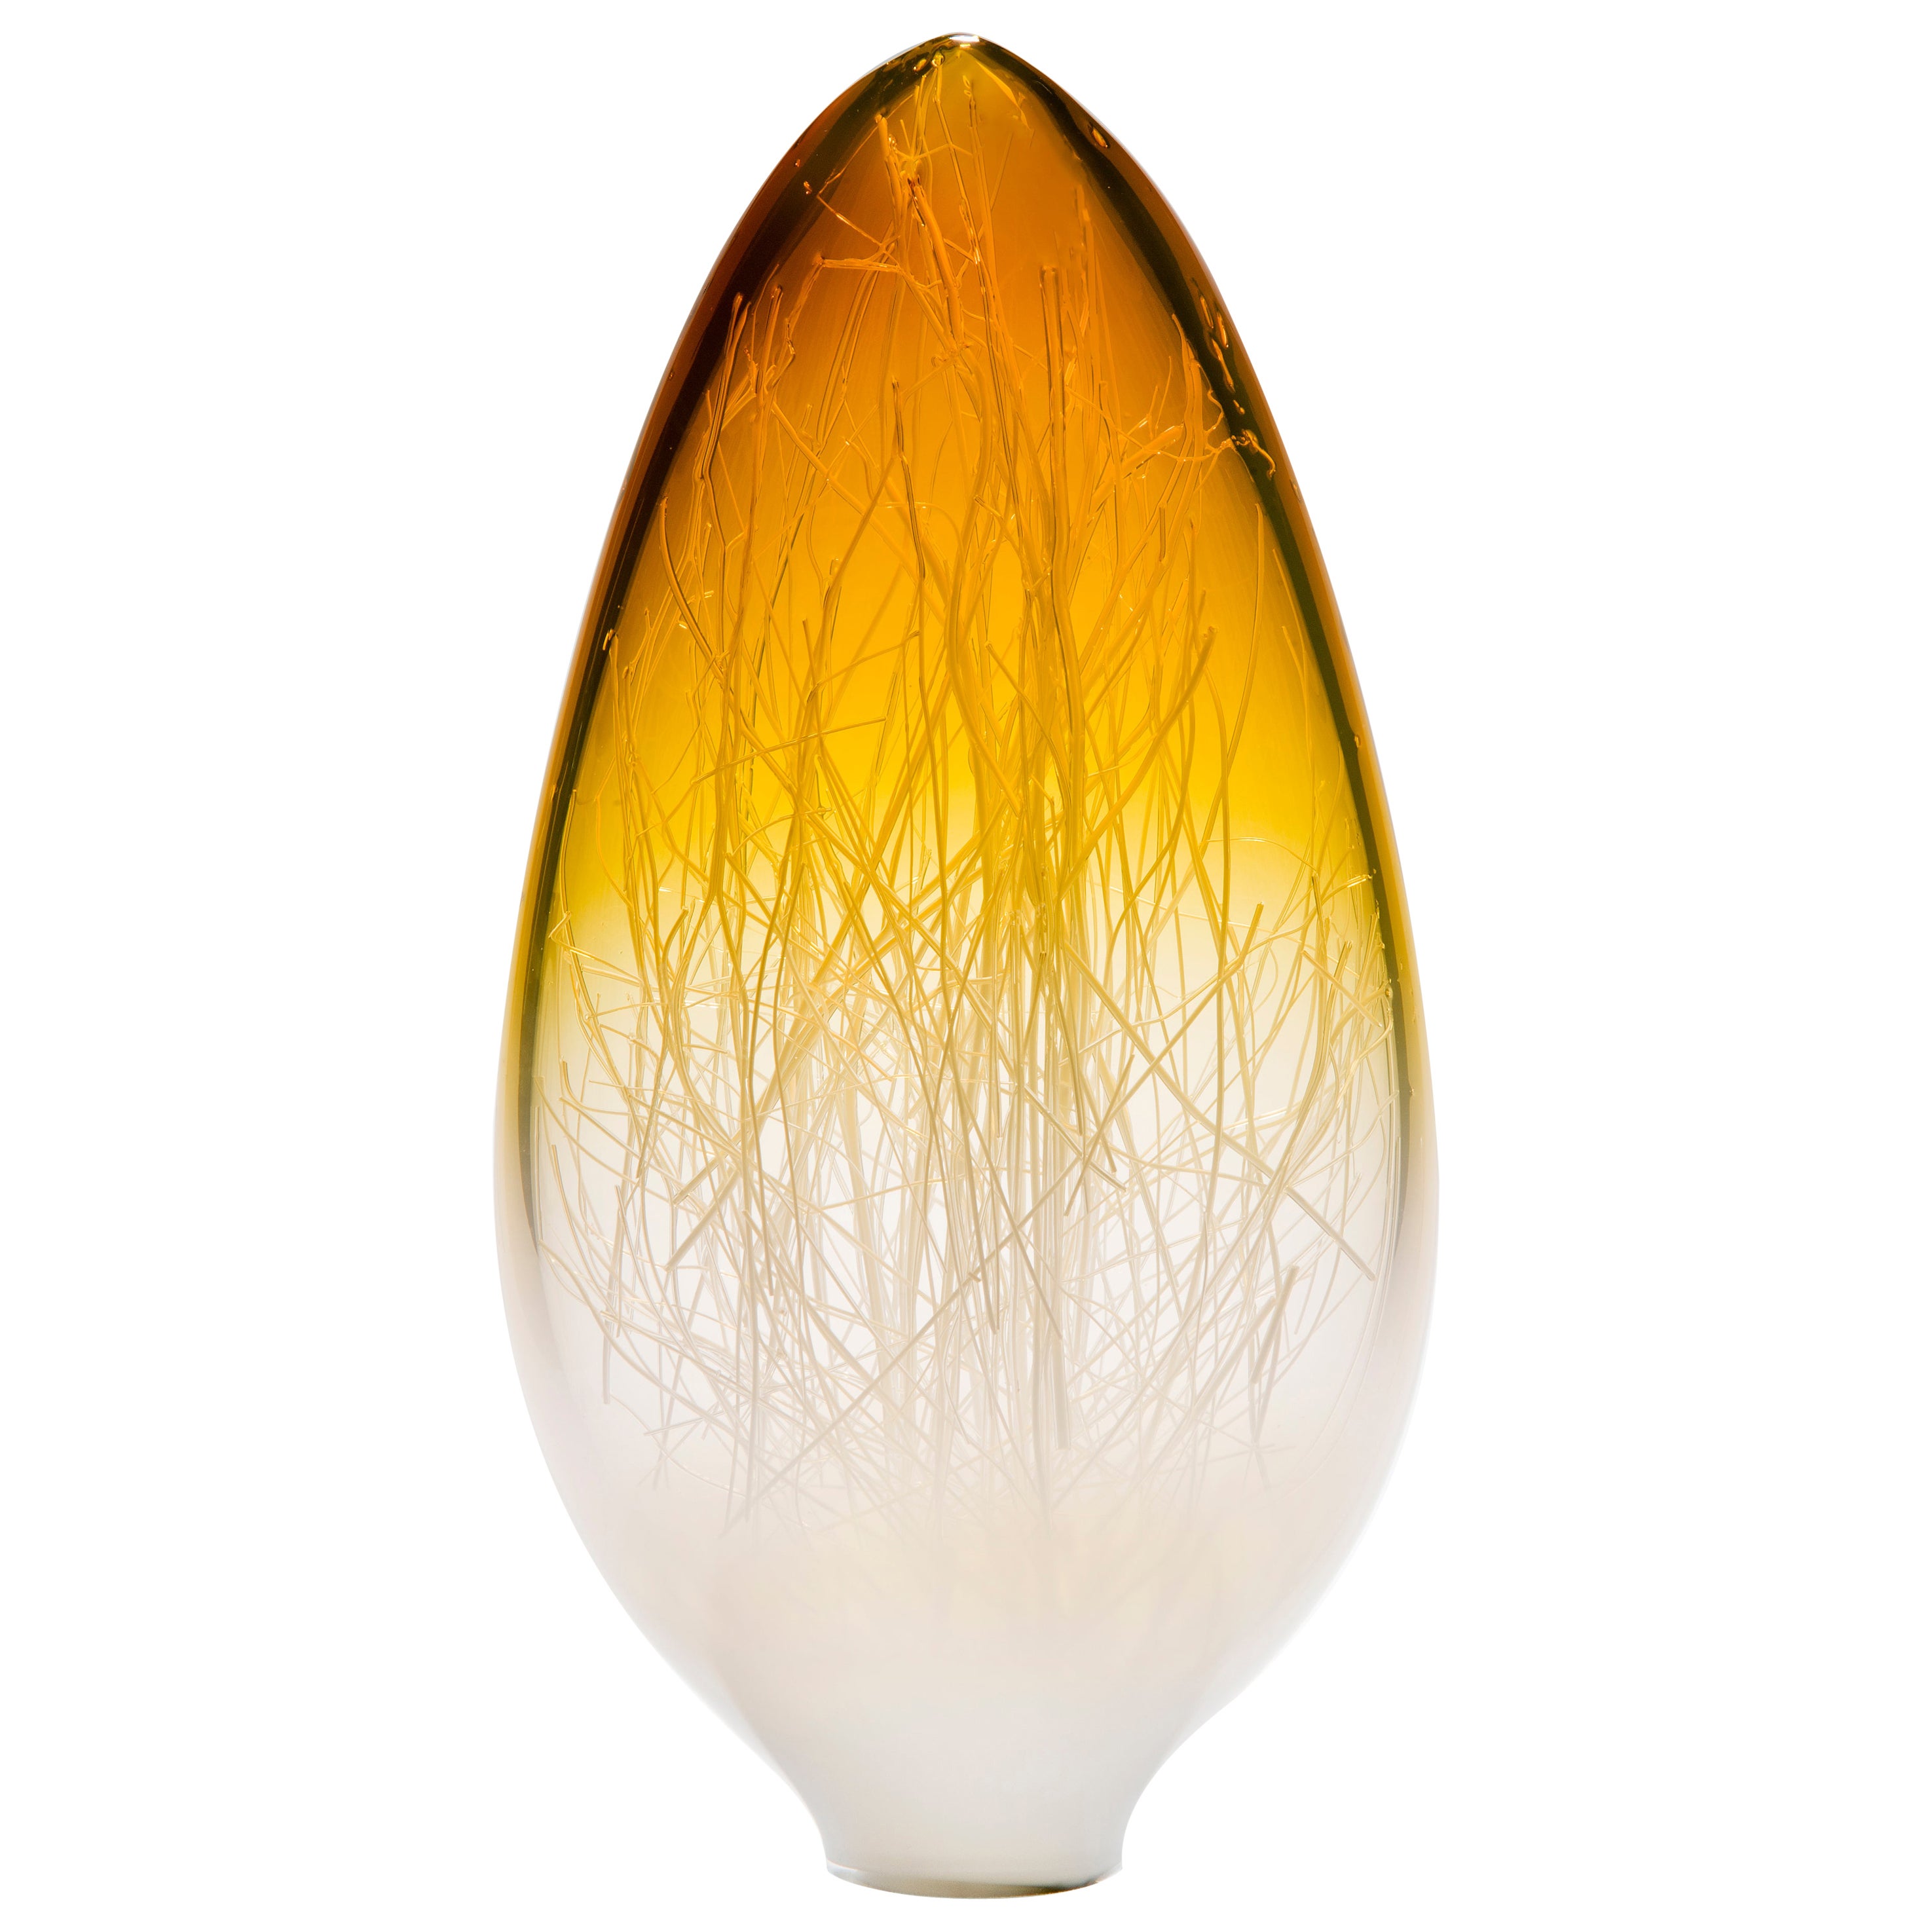  Panicum in Amber and White, a Unique Glass Sculpture by Enemark & Thompson